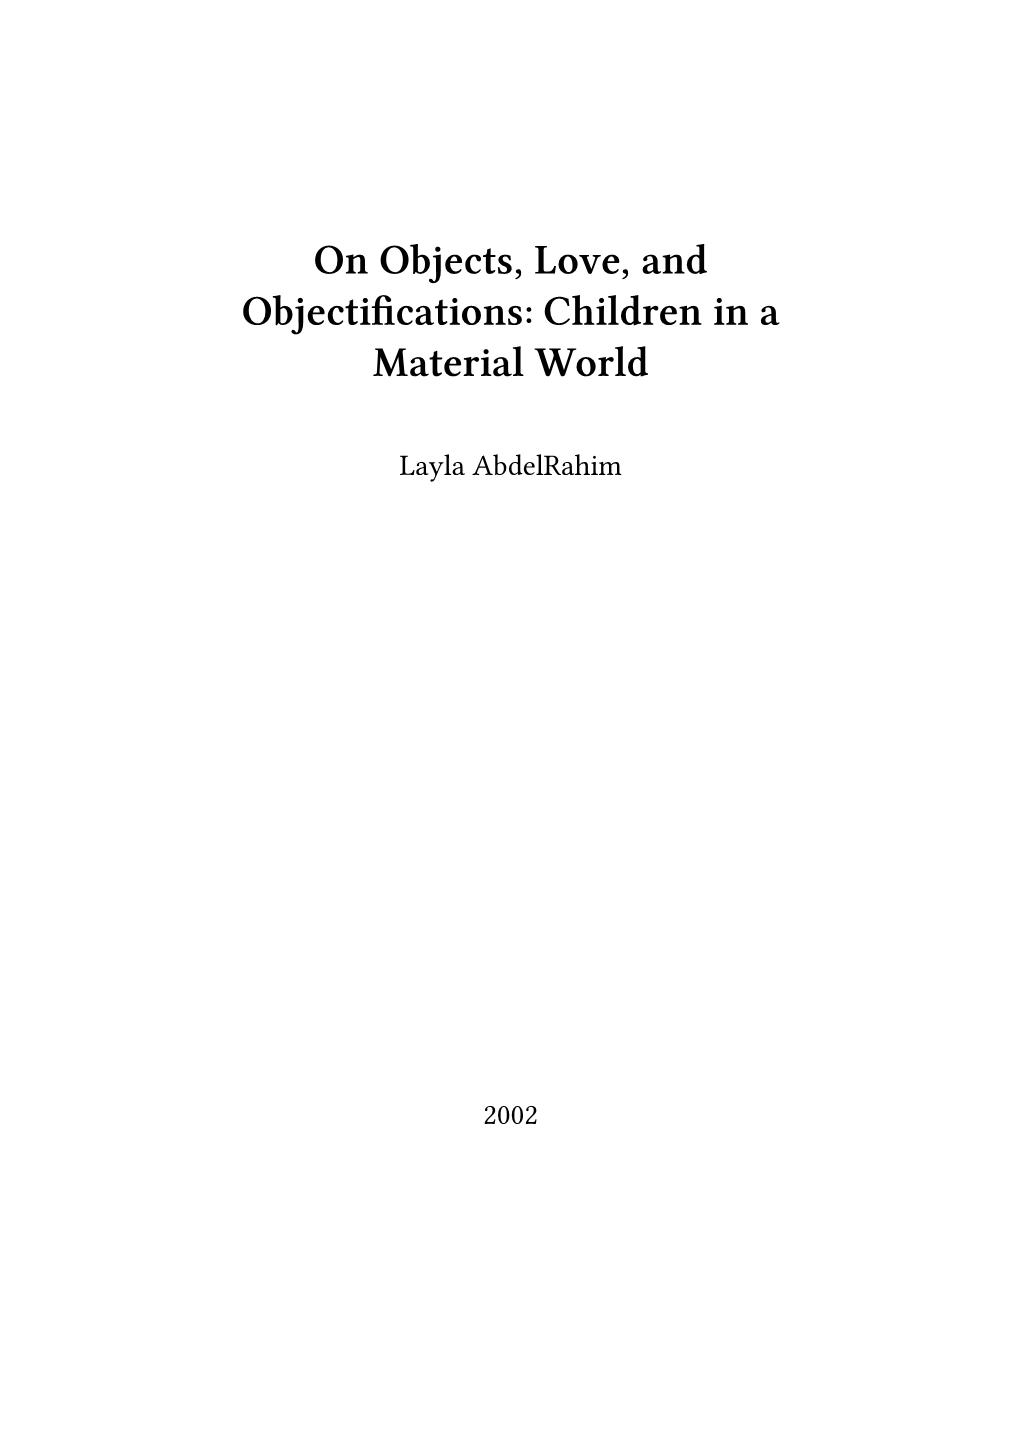 On Objects, Love, and Objectifications: Children in a Material World